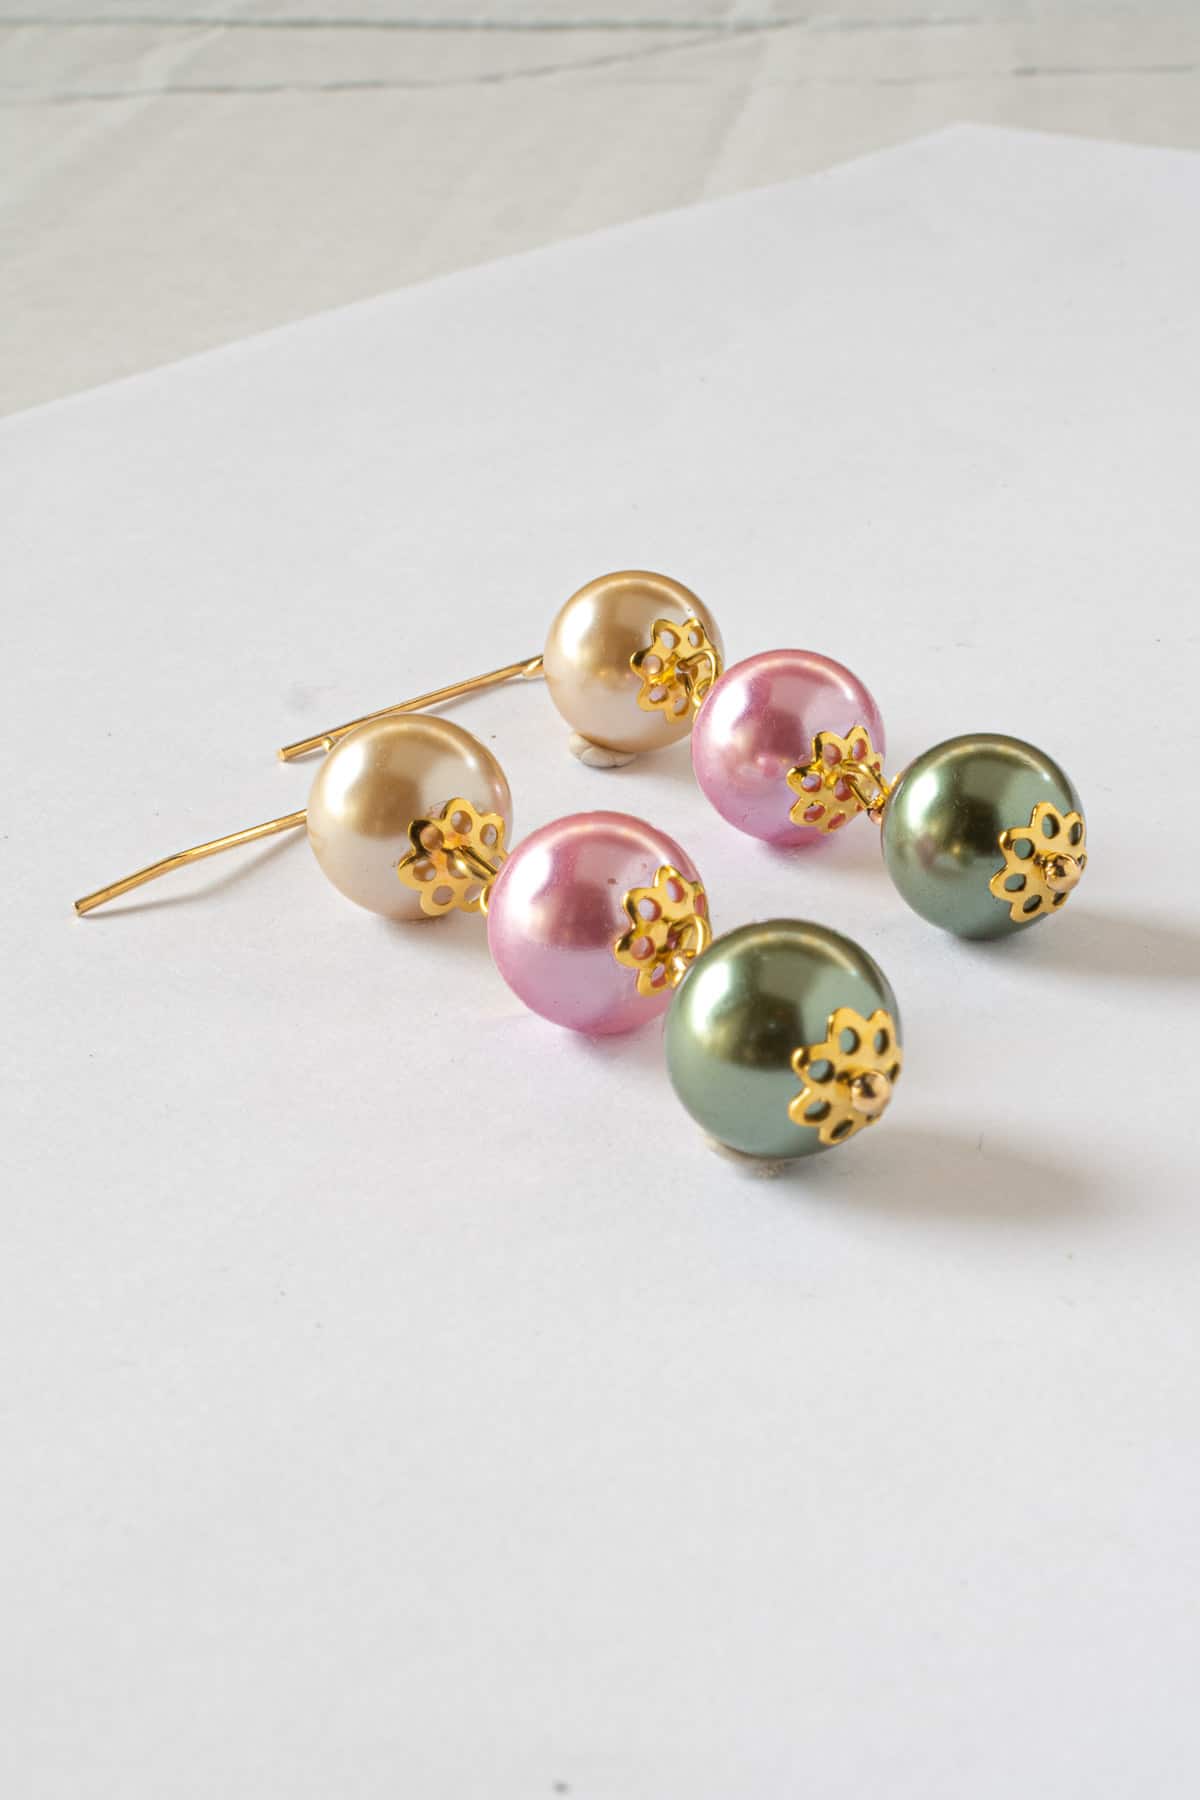 A pair of DIY pearl earrings in green, pink and champagne.